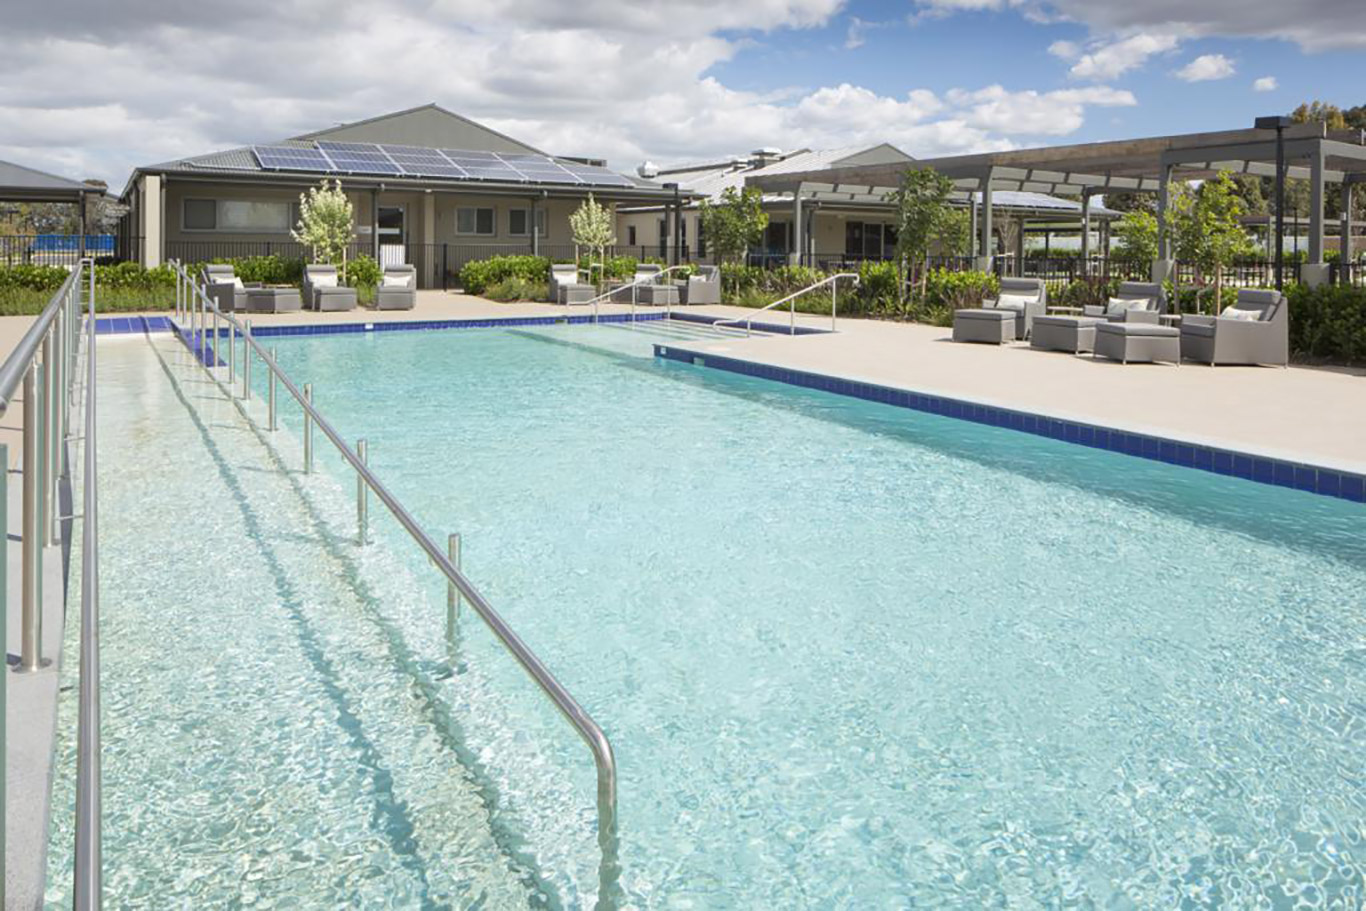 Aged Care & Senior Living Projects - anglicare ponds village community centre 1